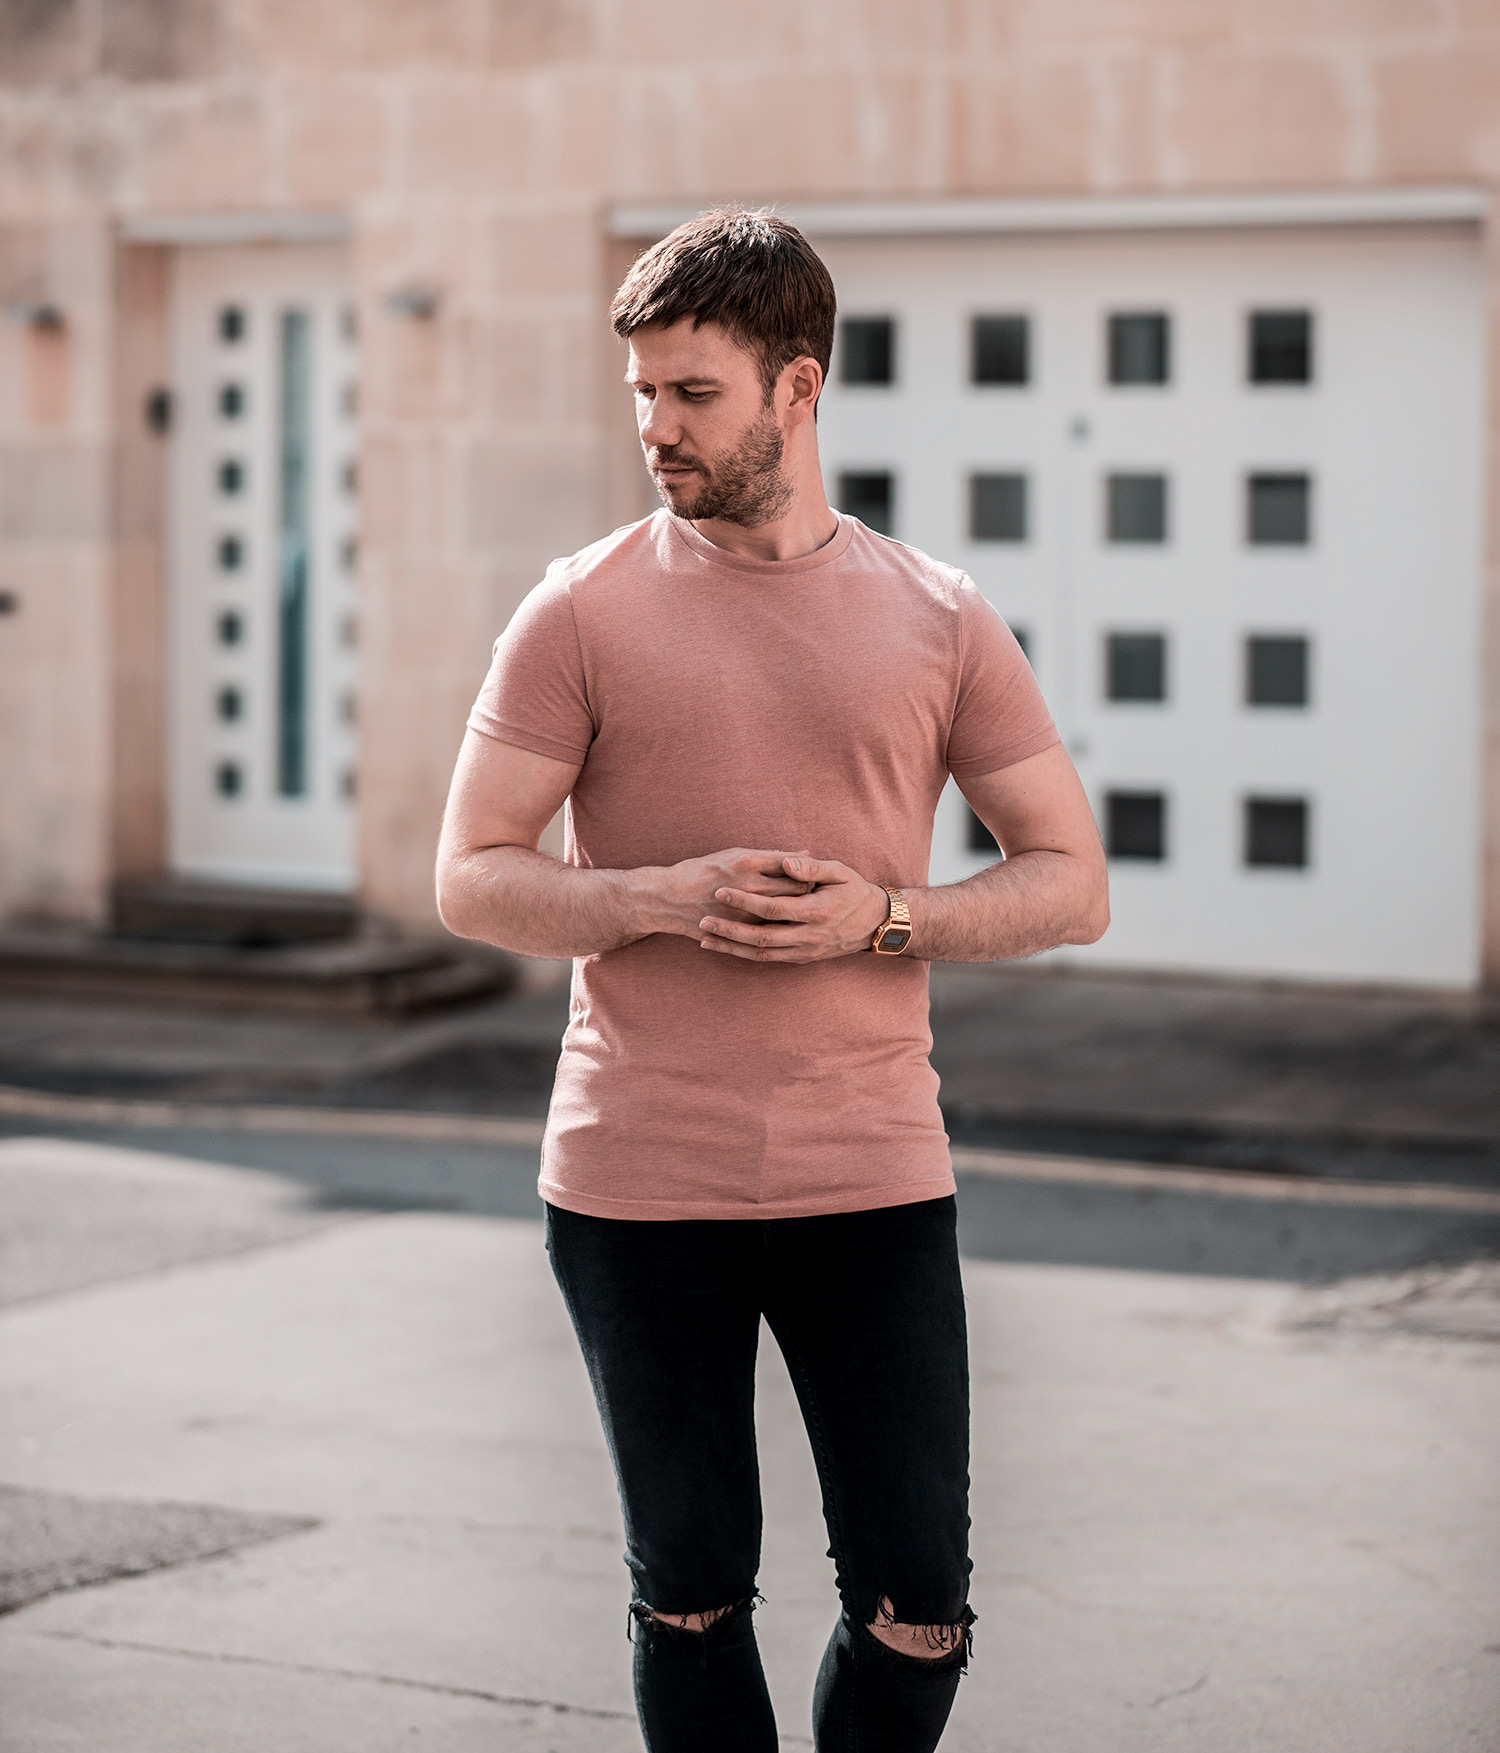 Pink T Shirt Summer Style Outfit - Your Average Guy